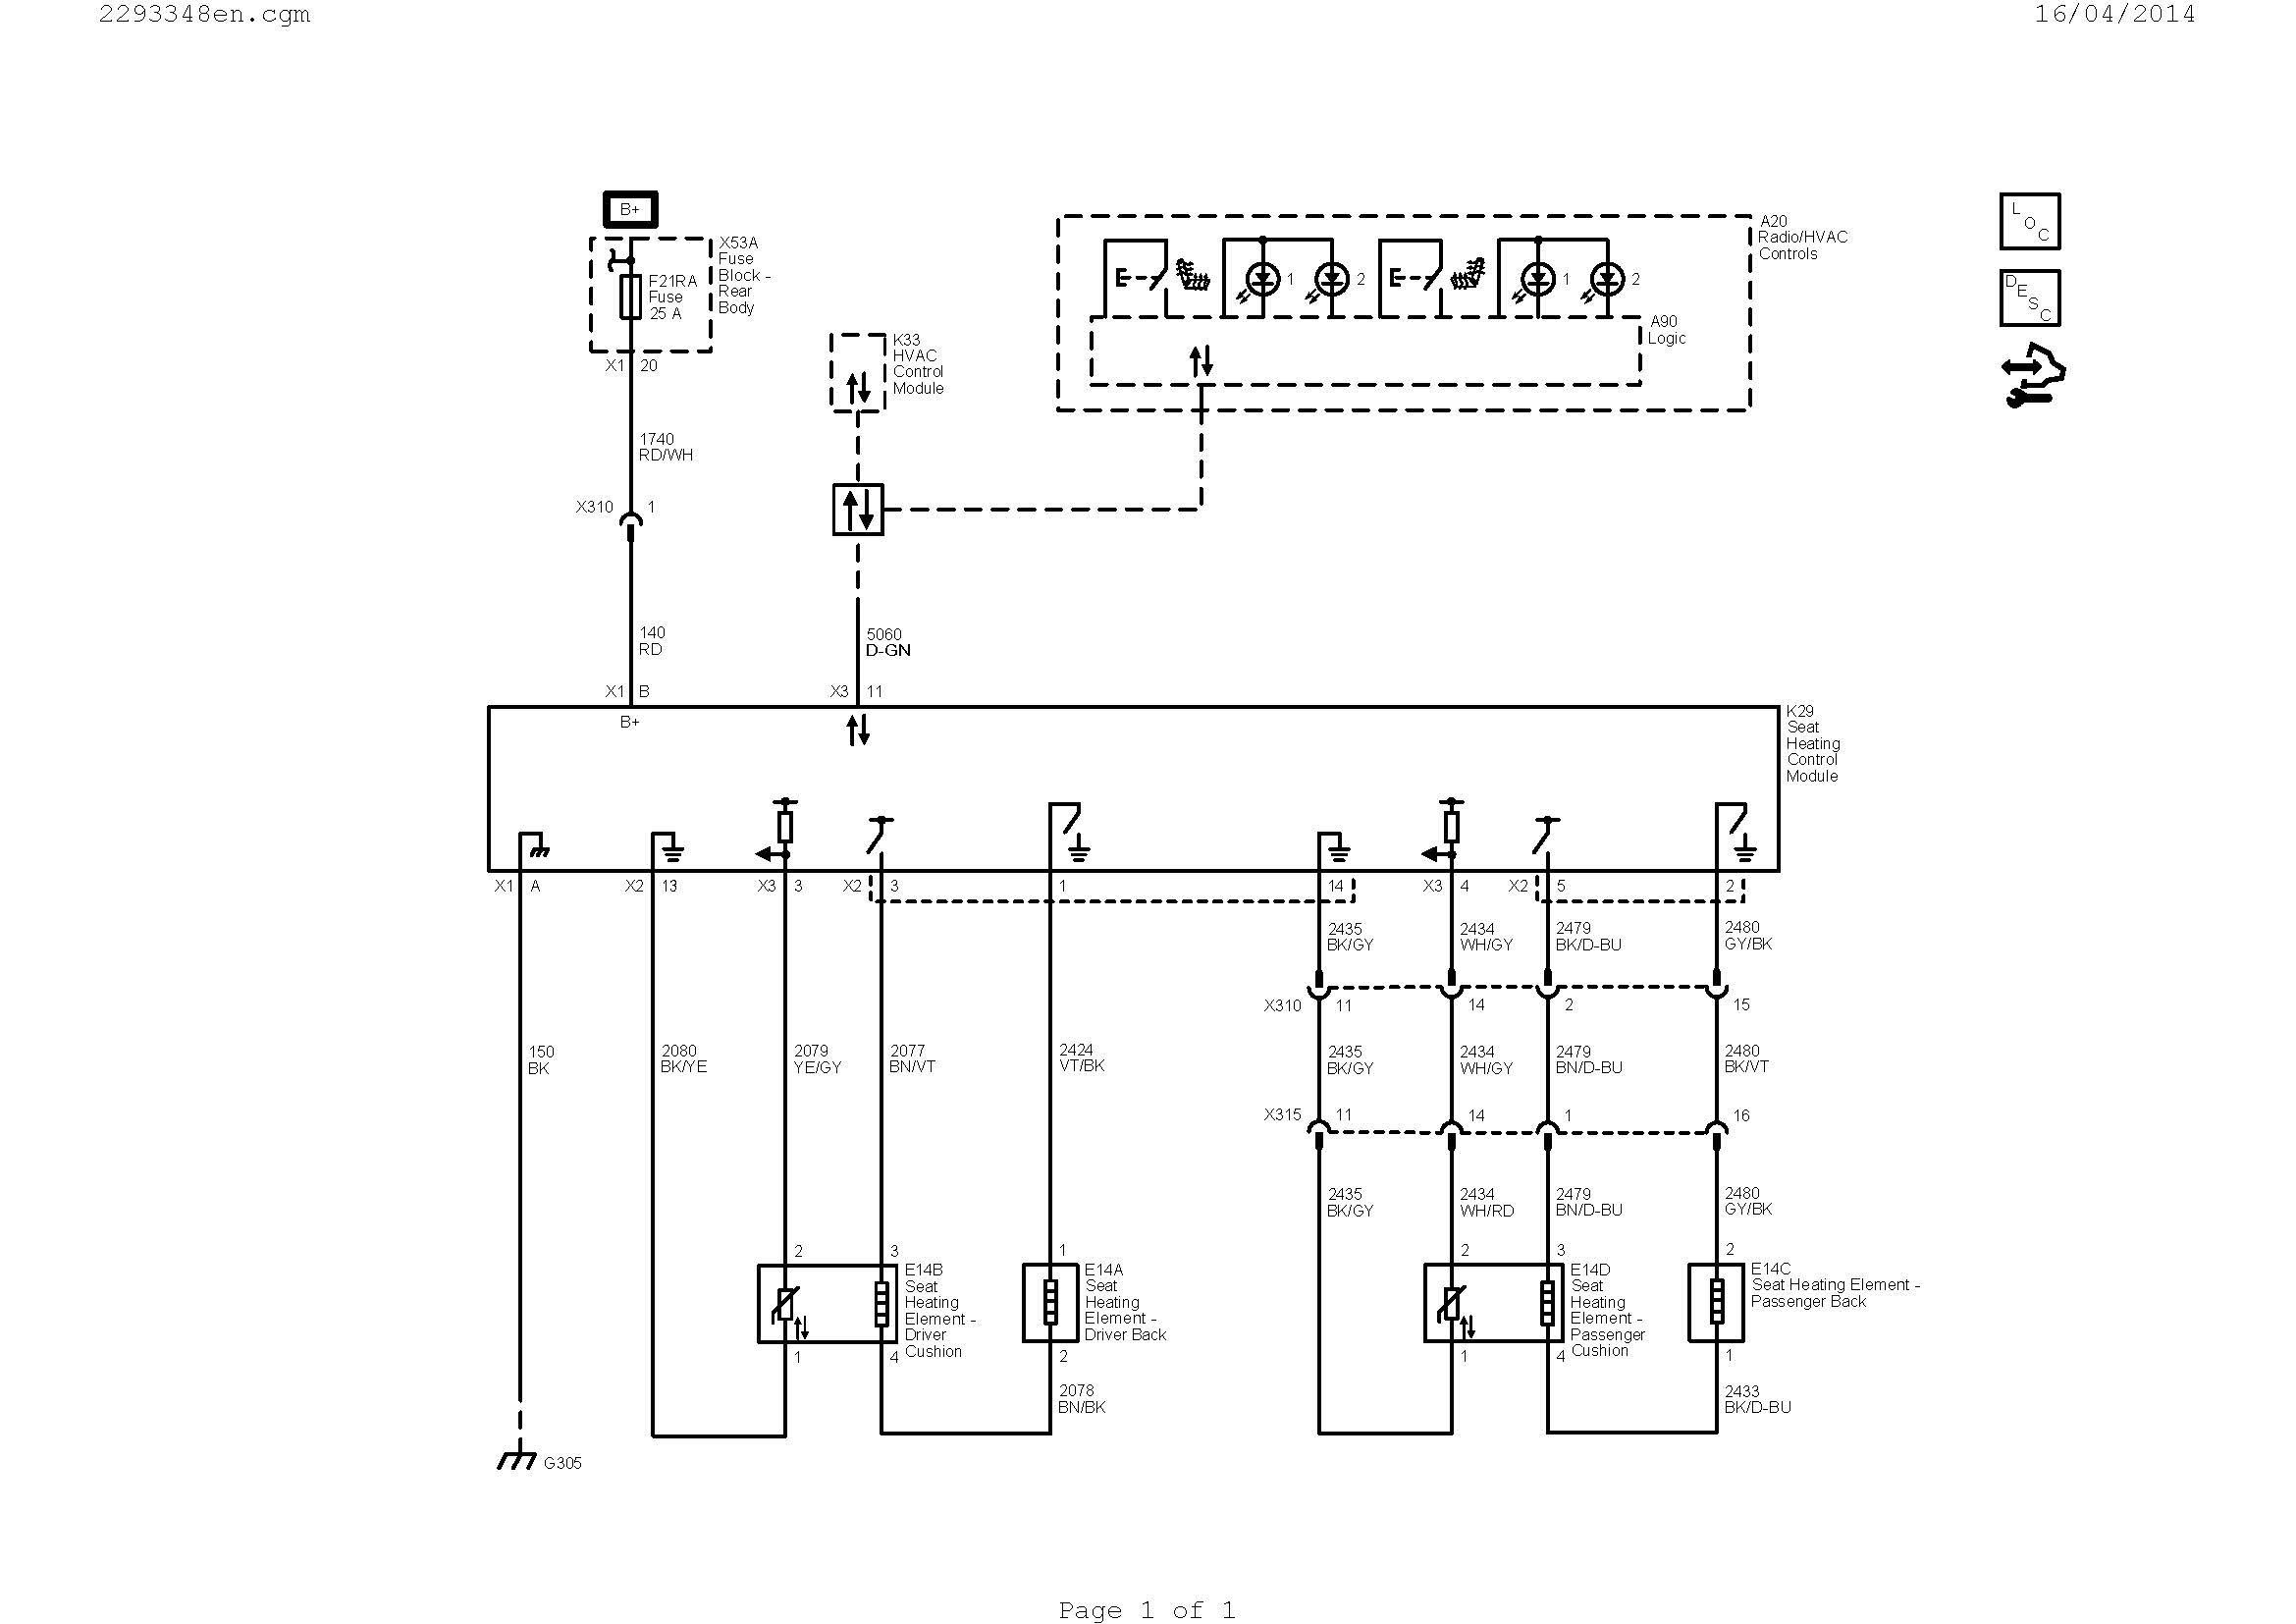 Fresh Wiring Diagrams for Electrical Residential Wiring Diagrams Collection